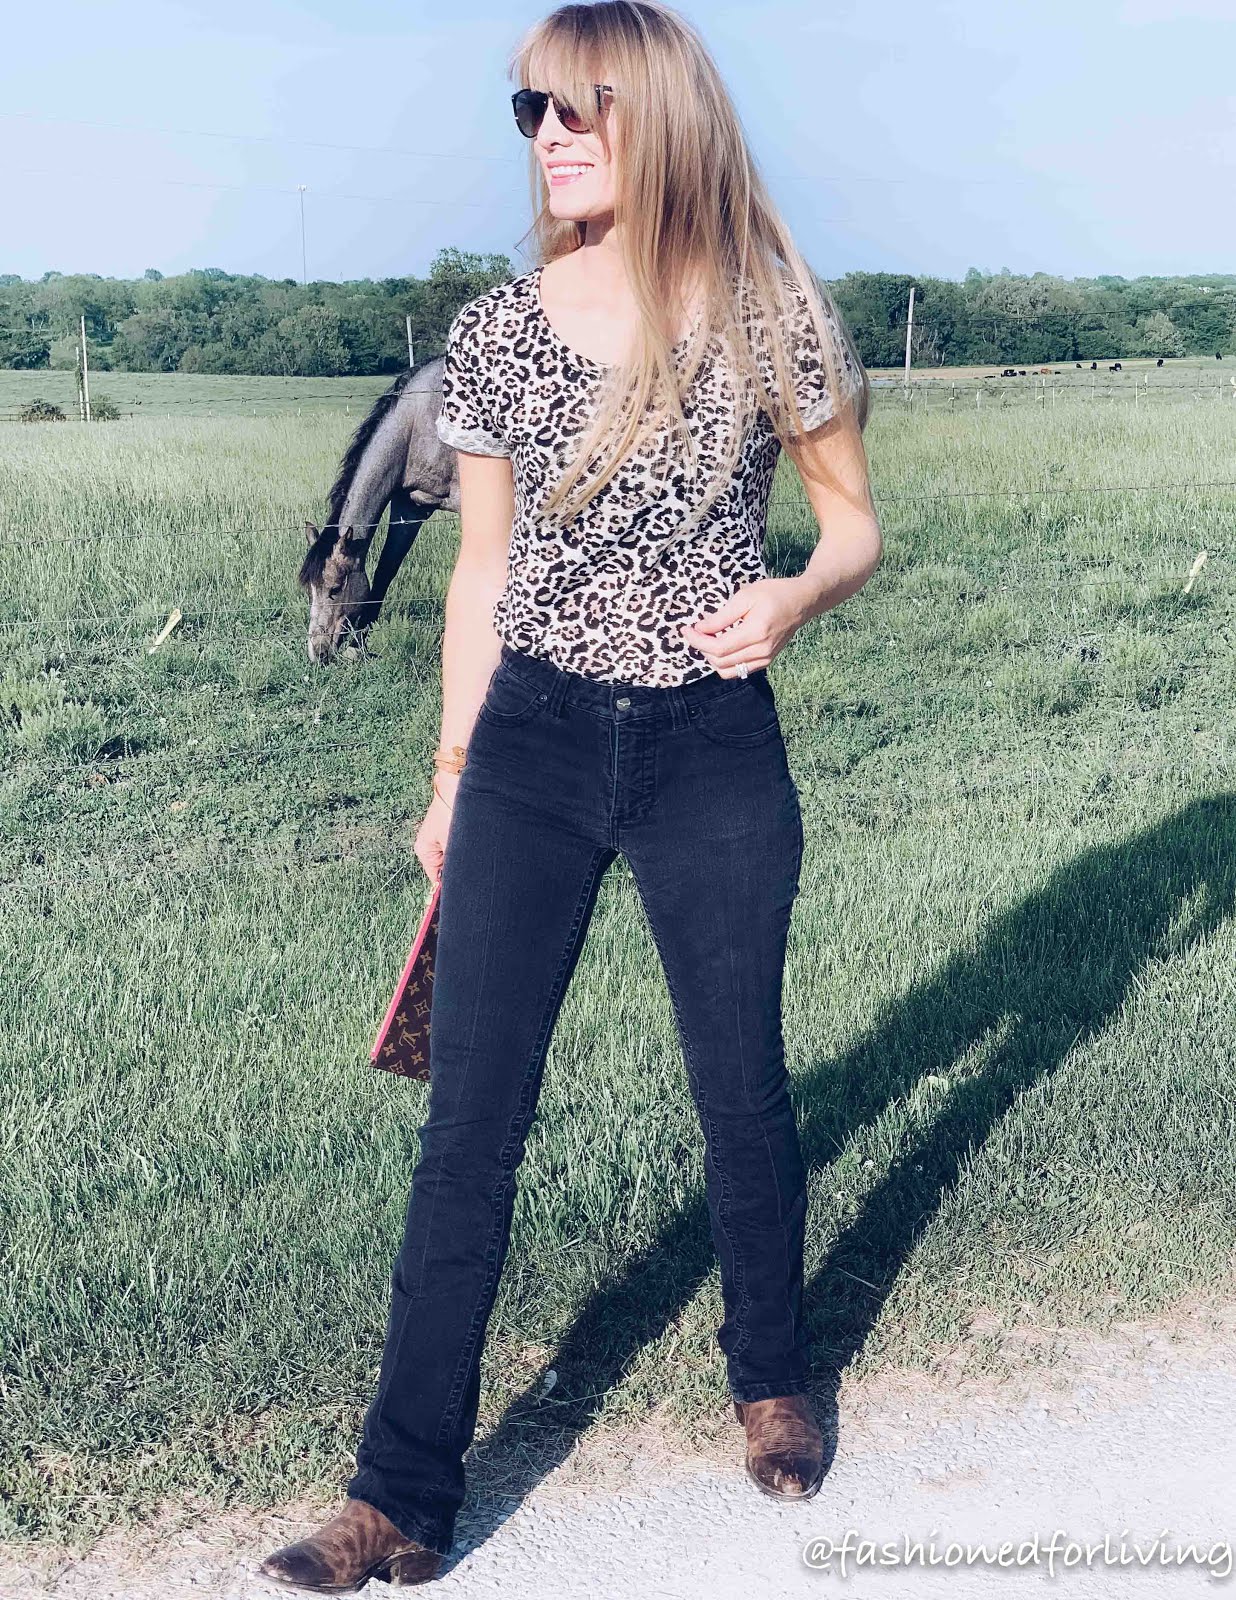 kimes betty jeans outfit with leopard tee. cowgirl boots.